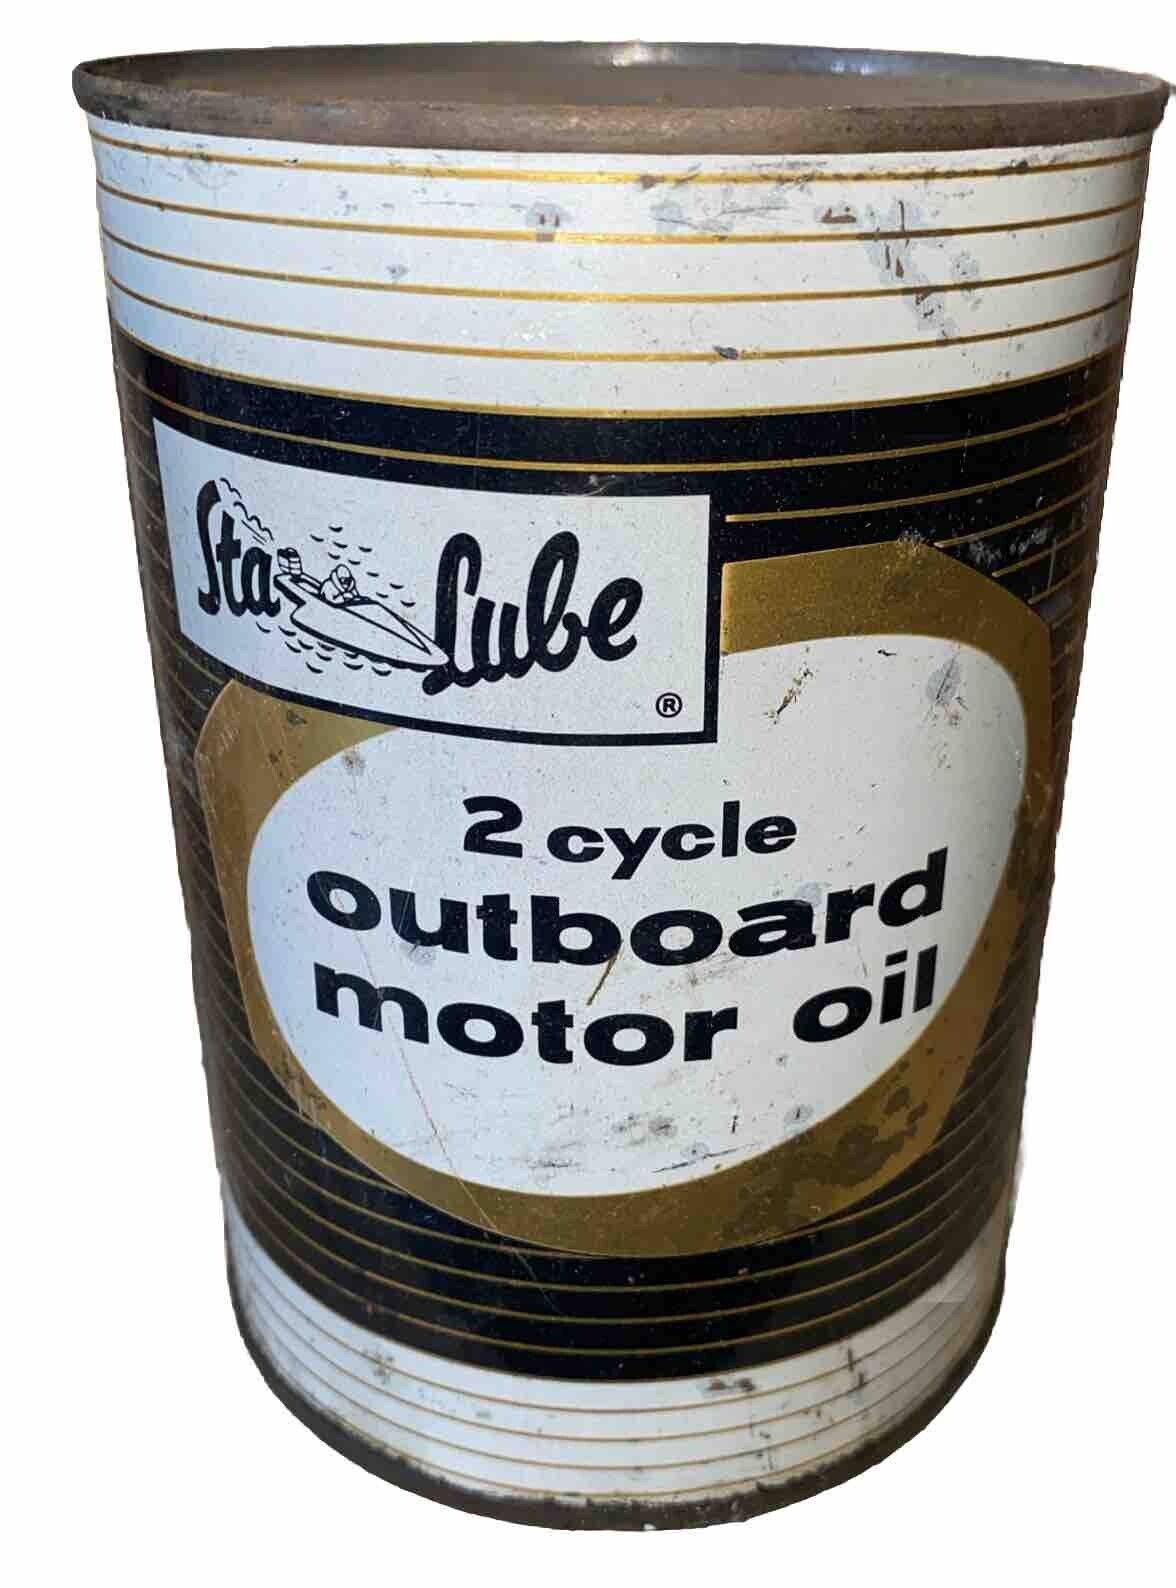 Sta-lube 2 Cycle Outboard Motor Oil 1 Quart Oil Can-Rare-Vintage New Full